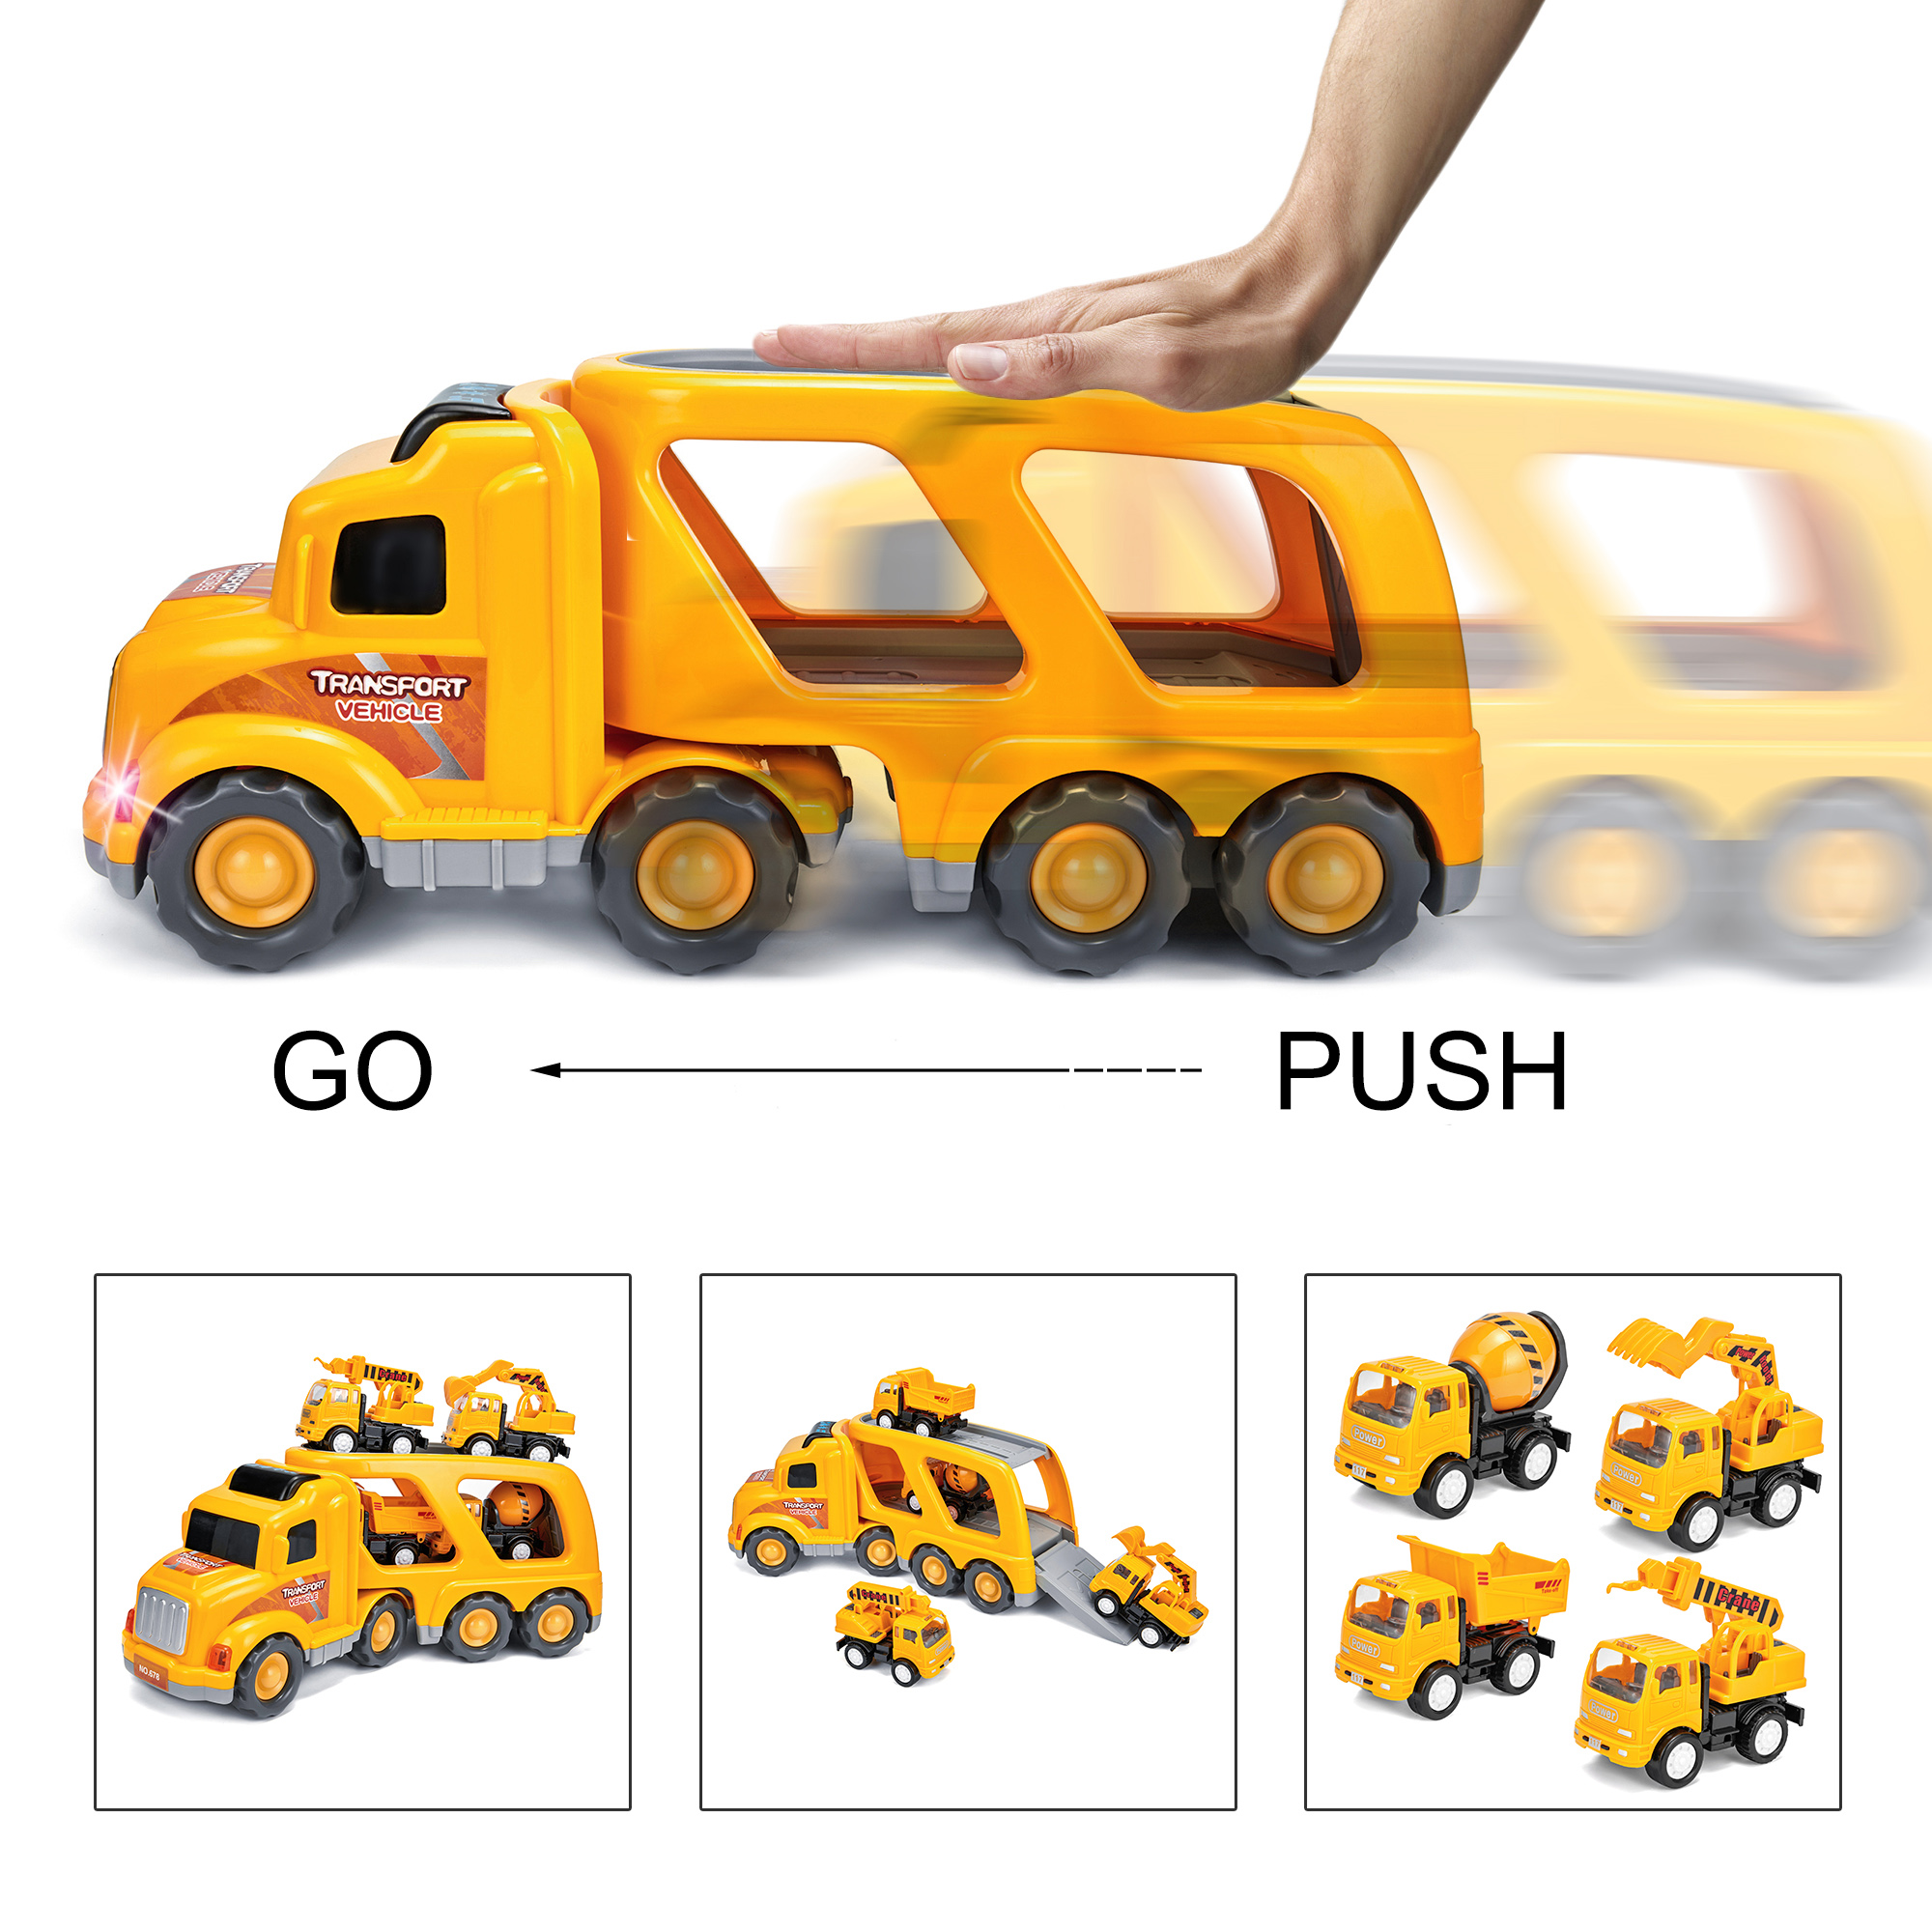 DODOING 5 in 1 Construction Truck Toys Vehicles Set,Transport Truck Carrier Toy with Excavator Mixer Crane Dump, Real Siren Brake Sounds & Lights, Removable Engineering Vehicle Parts - image 3 of 7